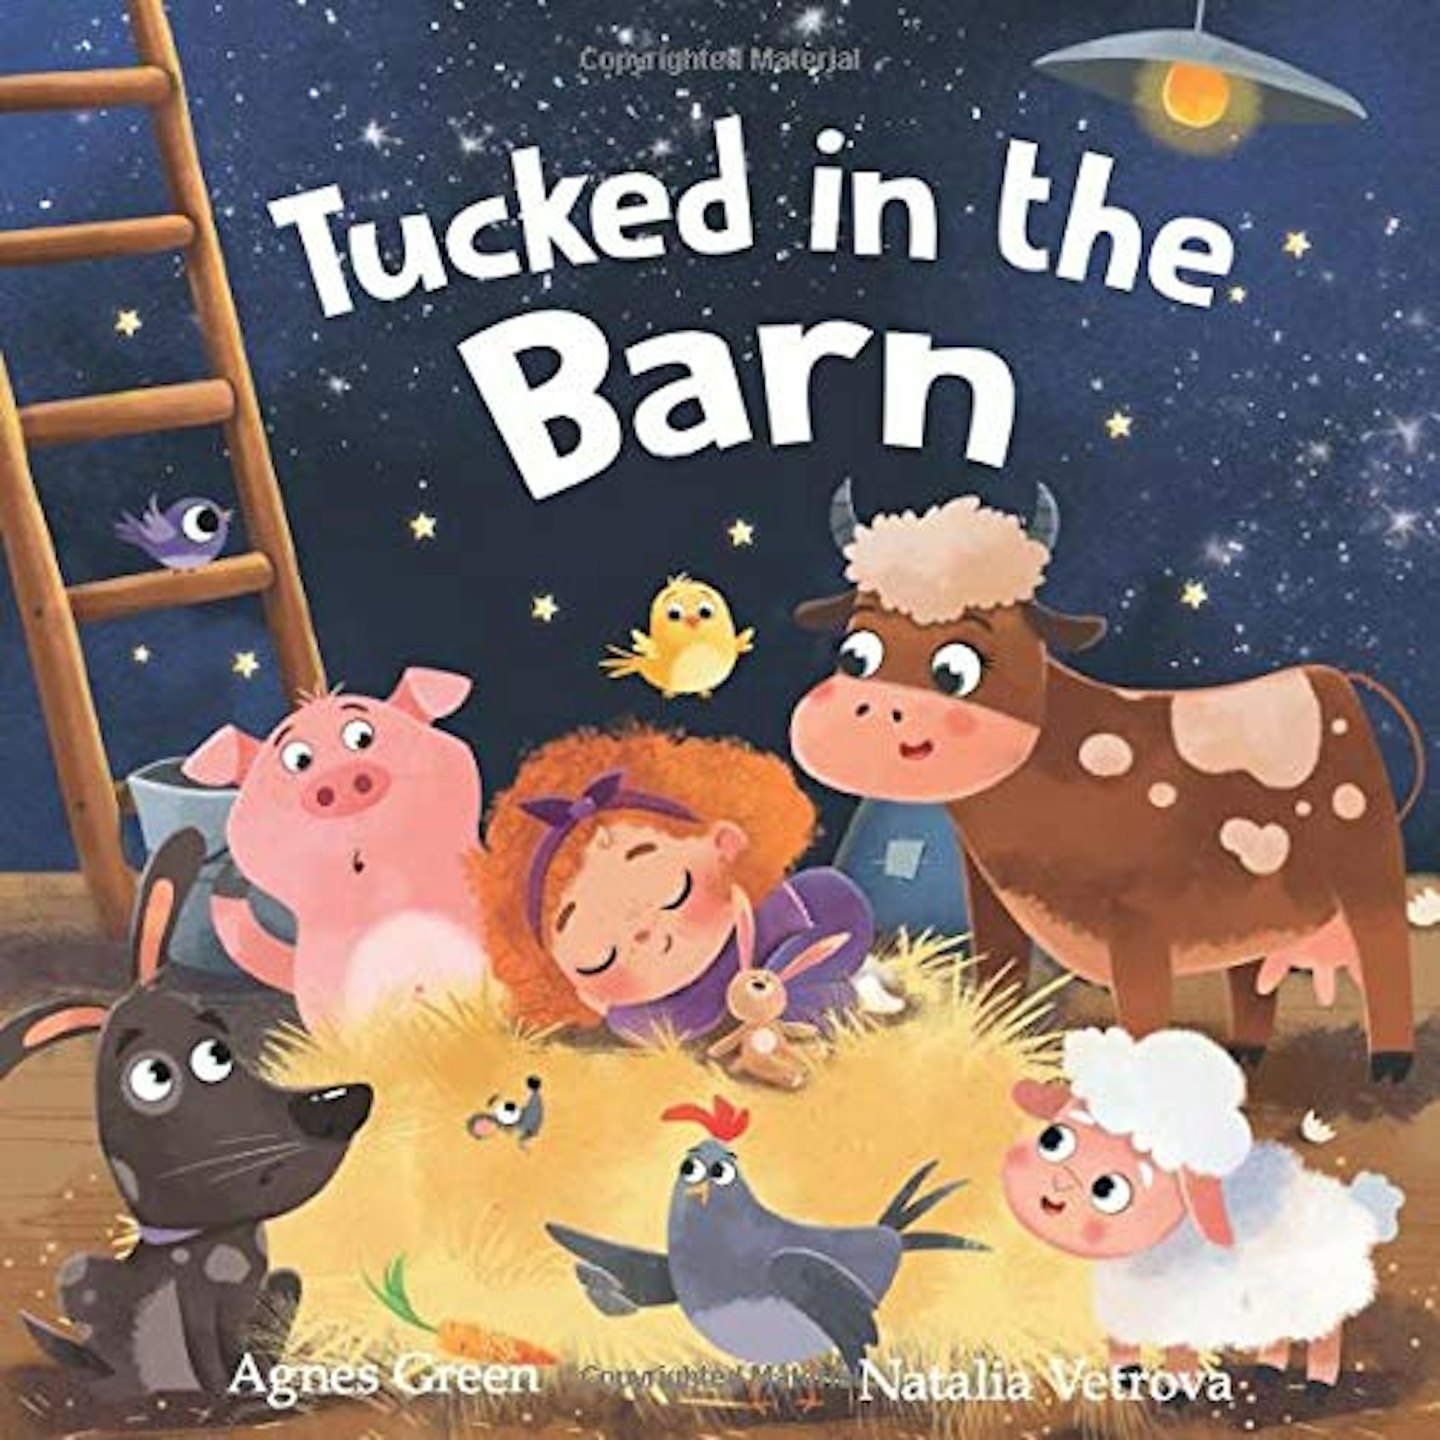 Tucked in the Barn: Farm Animals Bedtime Book